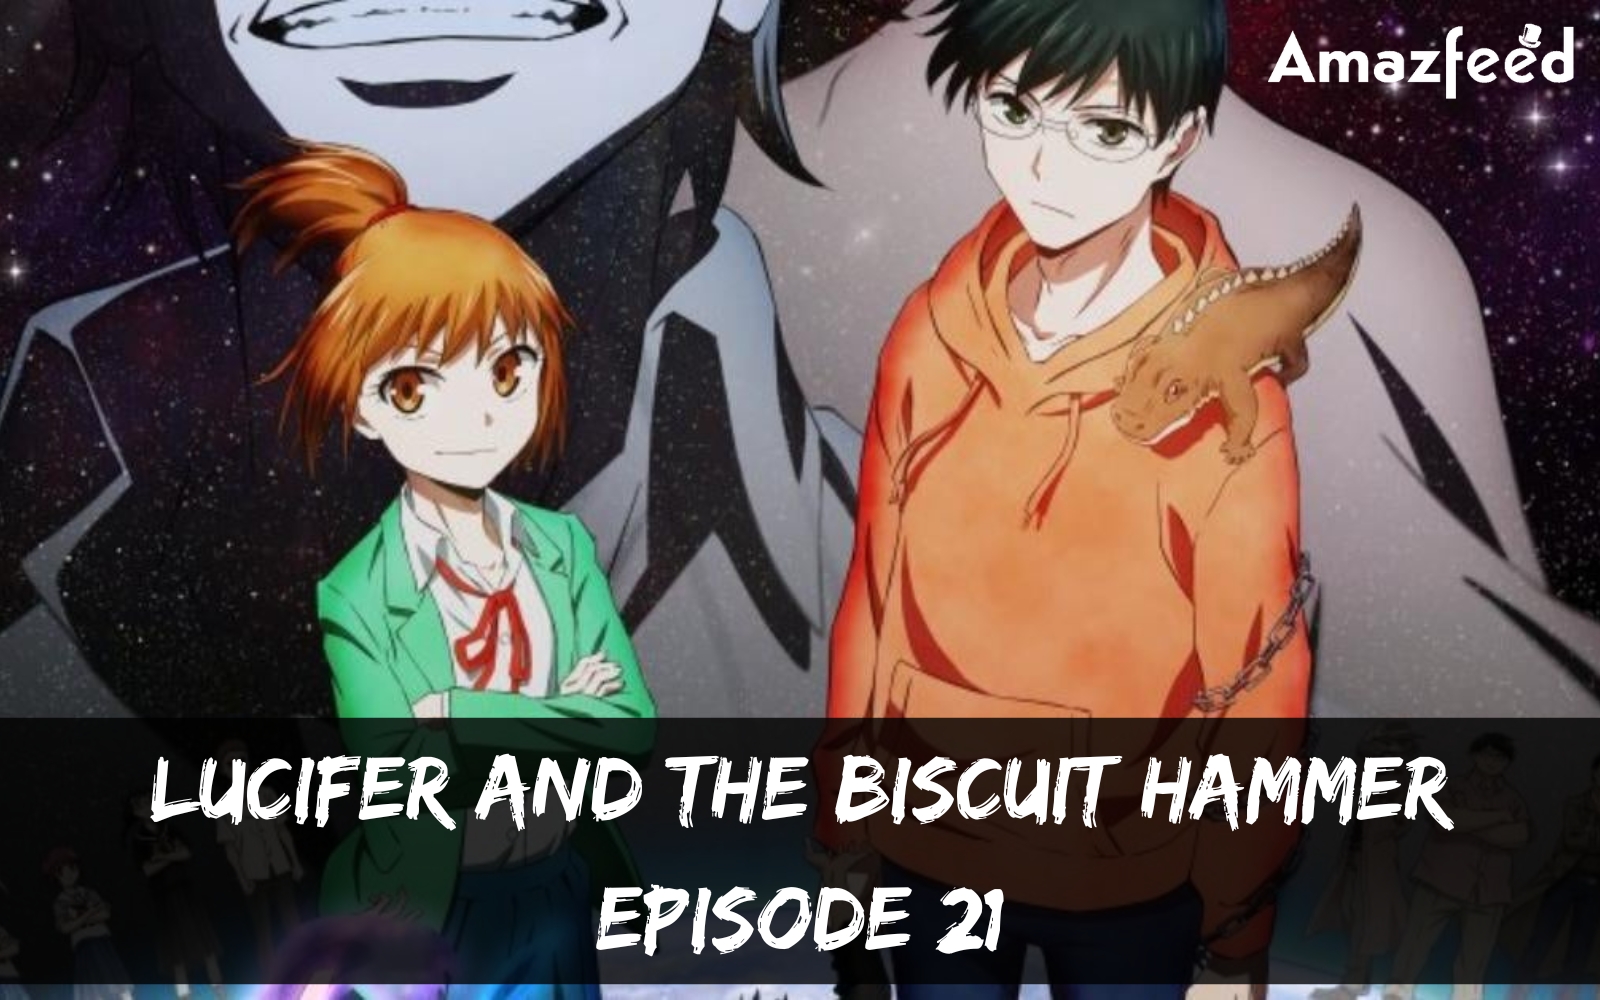 Lucifer and the Biscuit Hammer Episode 21